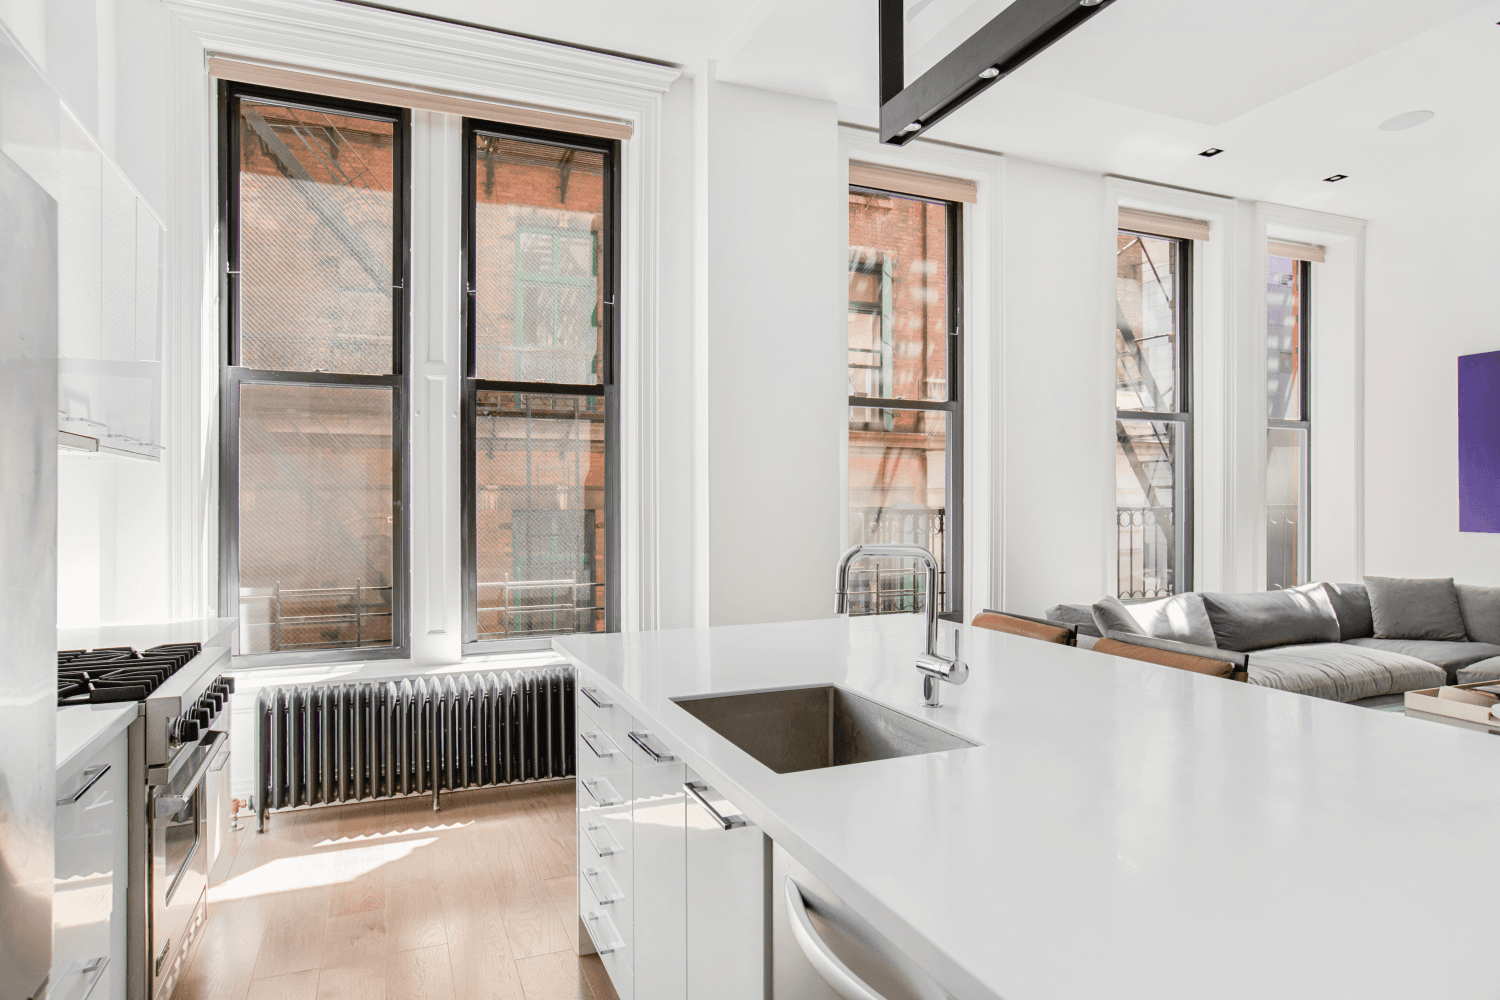 Step into a world of unparalleled elegance with this historic loft residence in Tribeca.